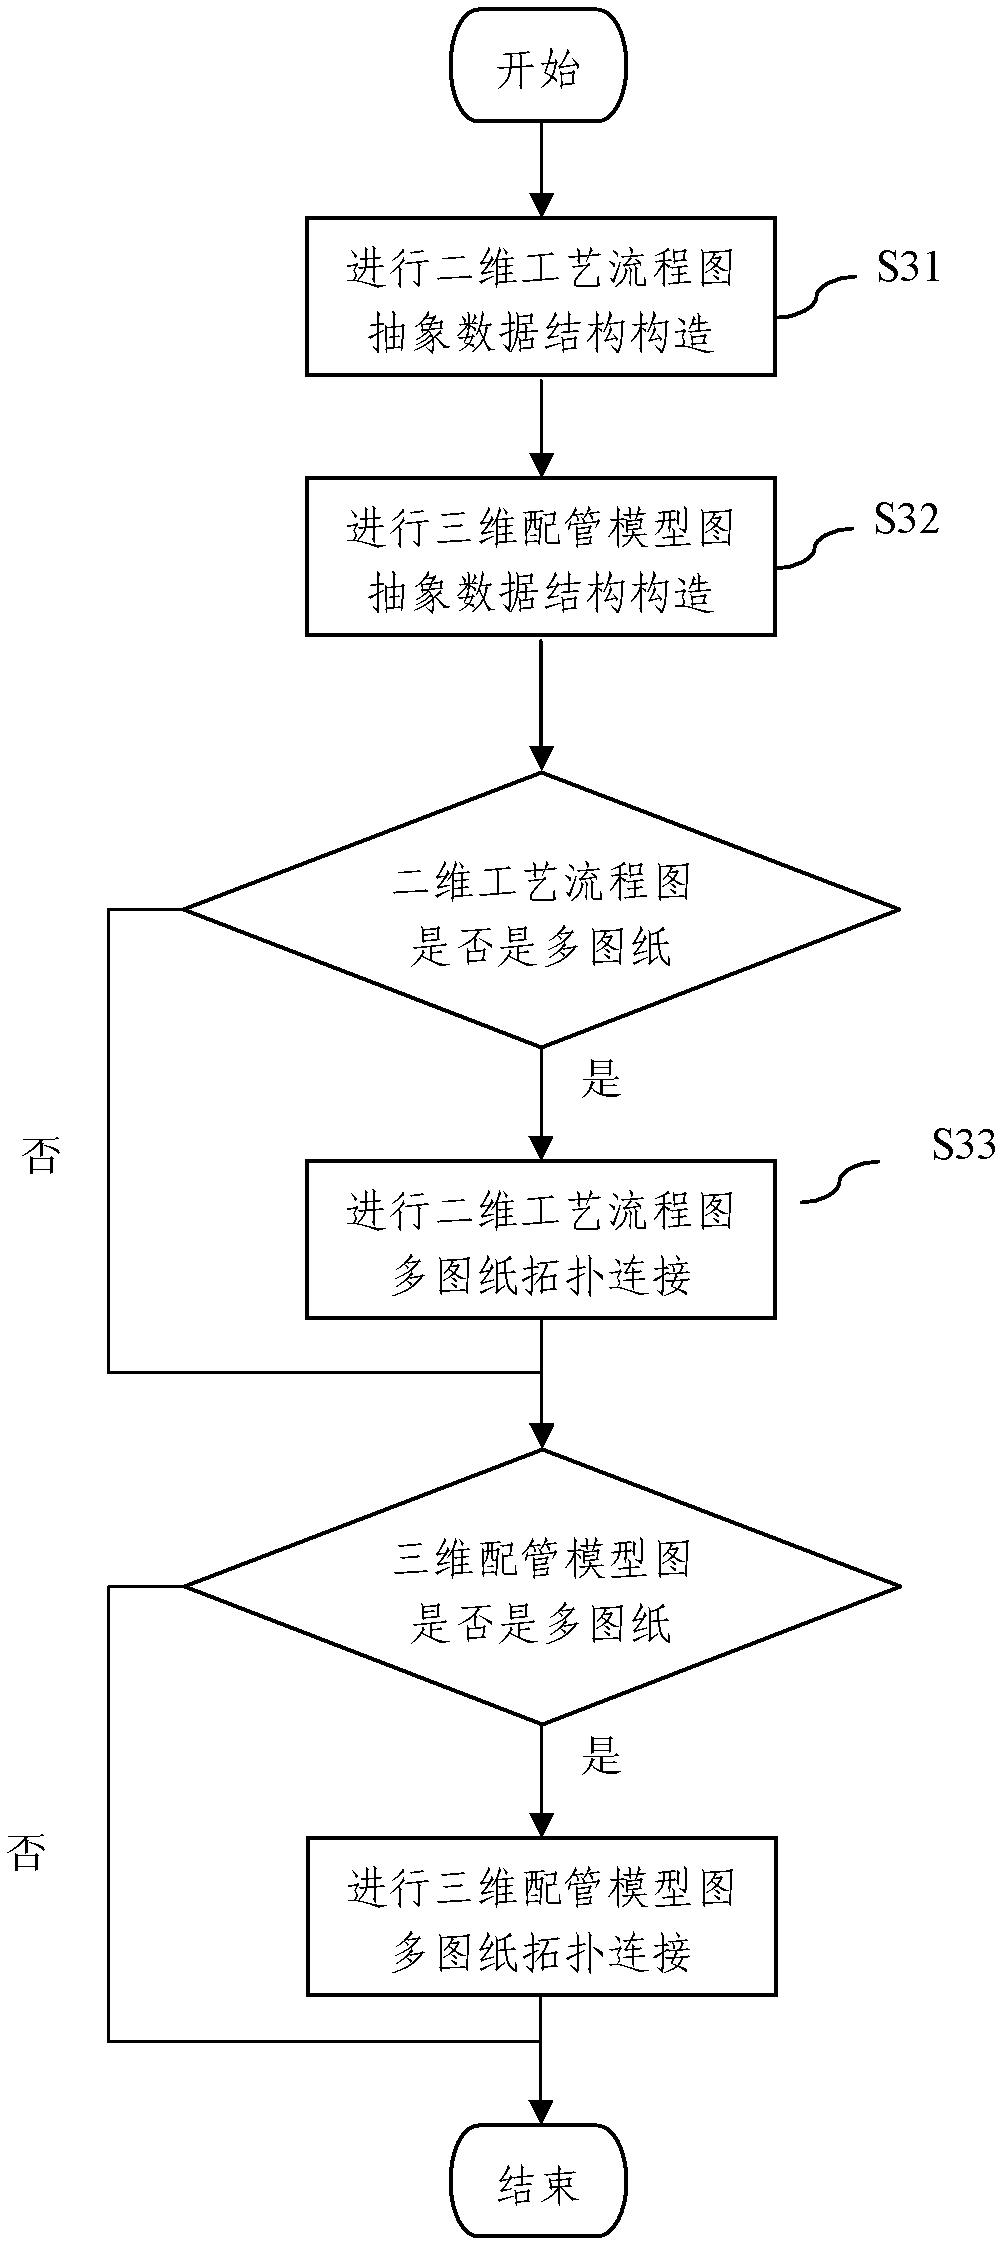 Drawing data conformity checking method based on diagram topology structure